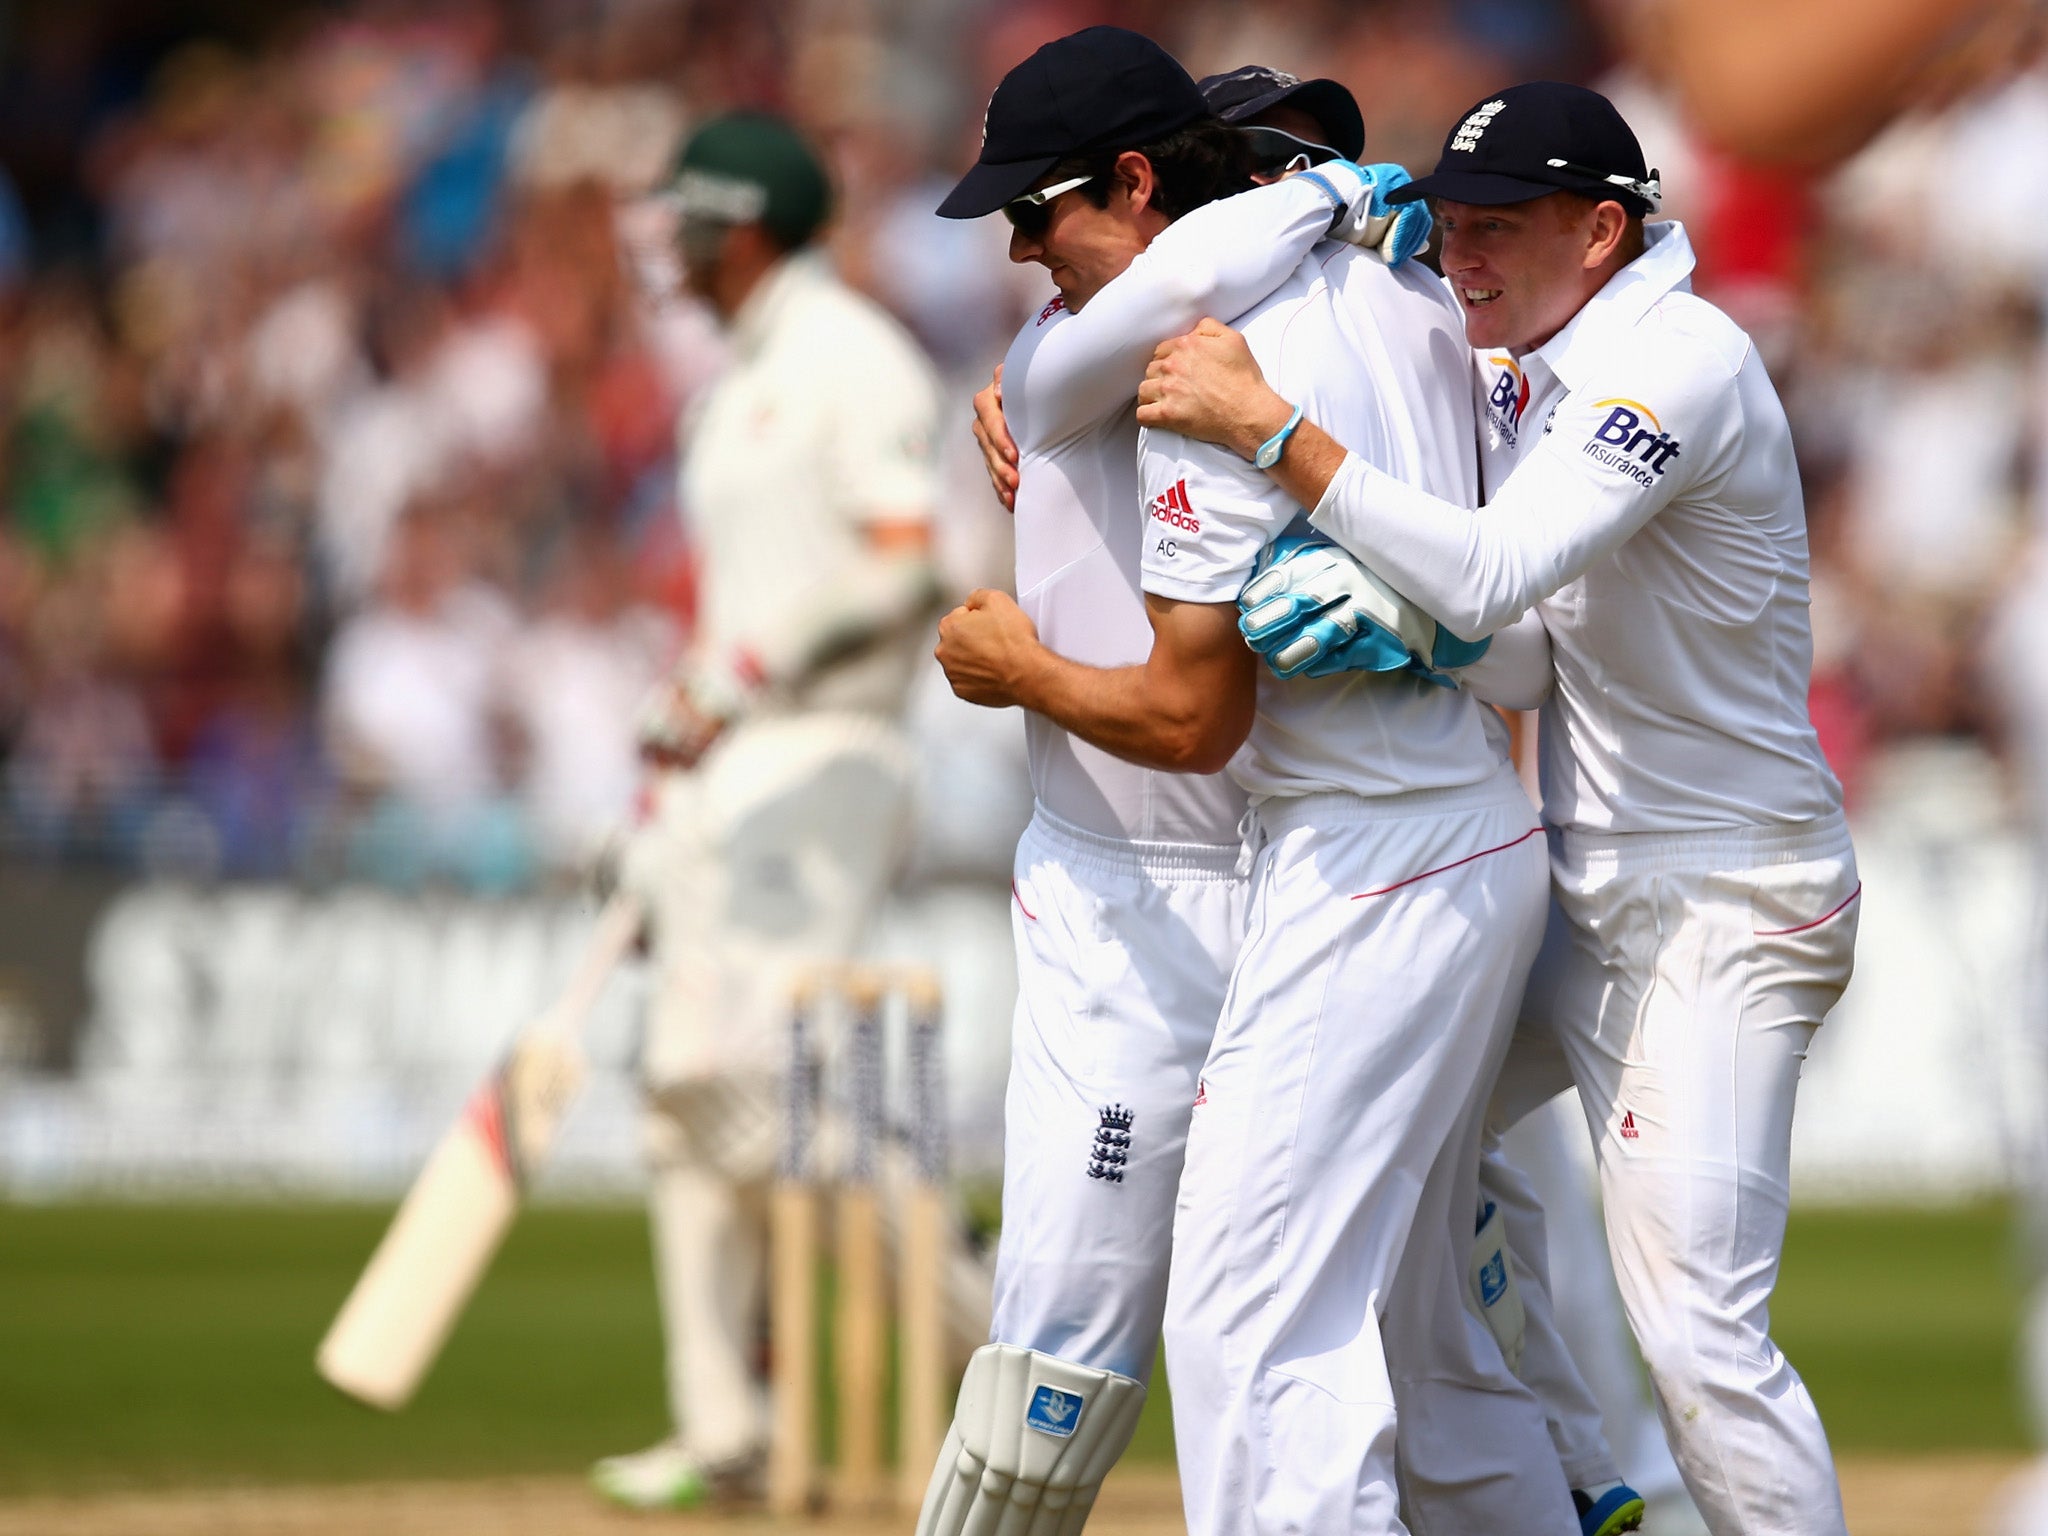 Alastair Cook of England celebrates after catching Peter Siddle of Australia off the bowling of James Anderson